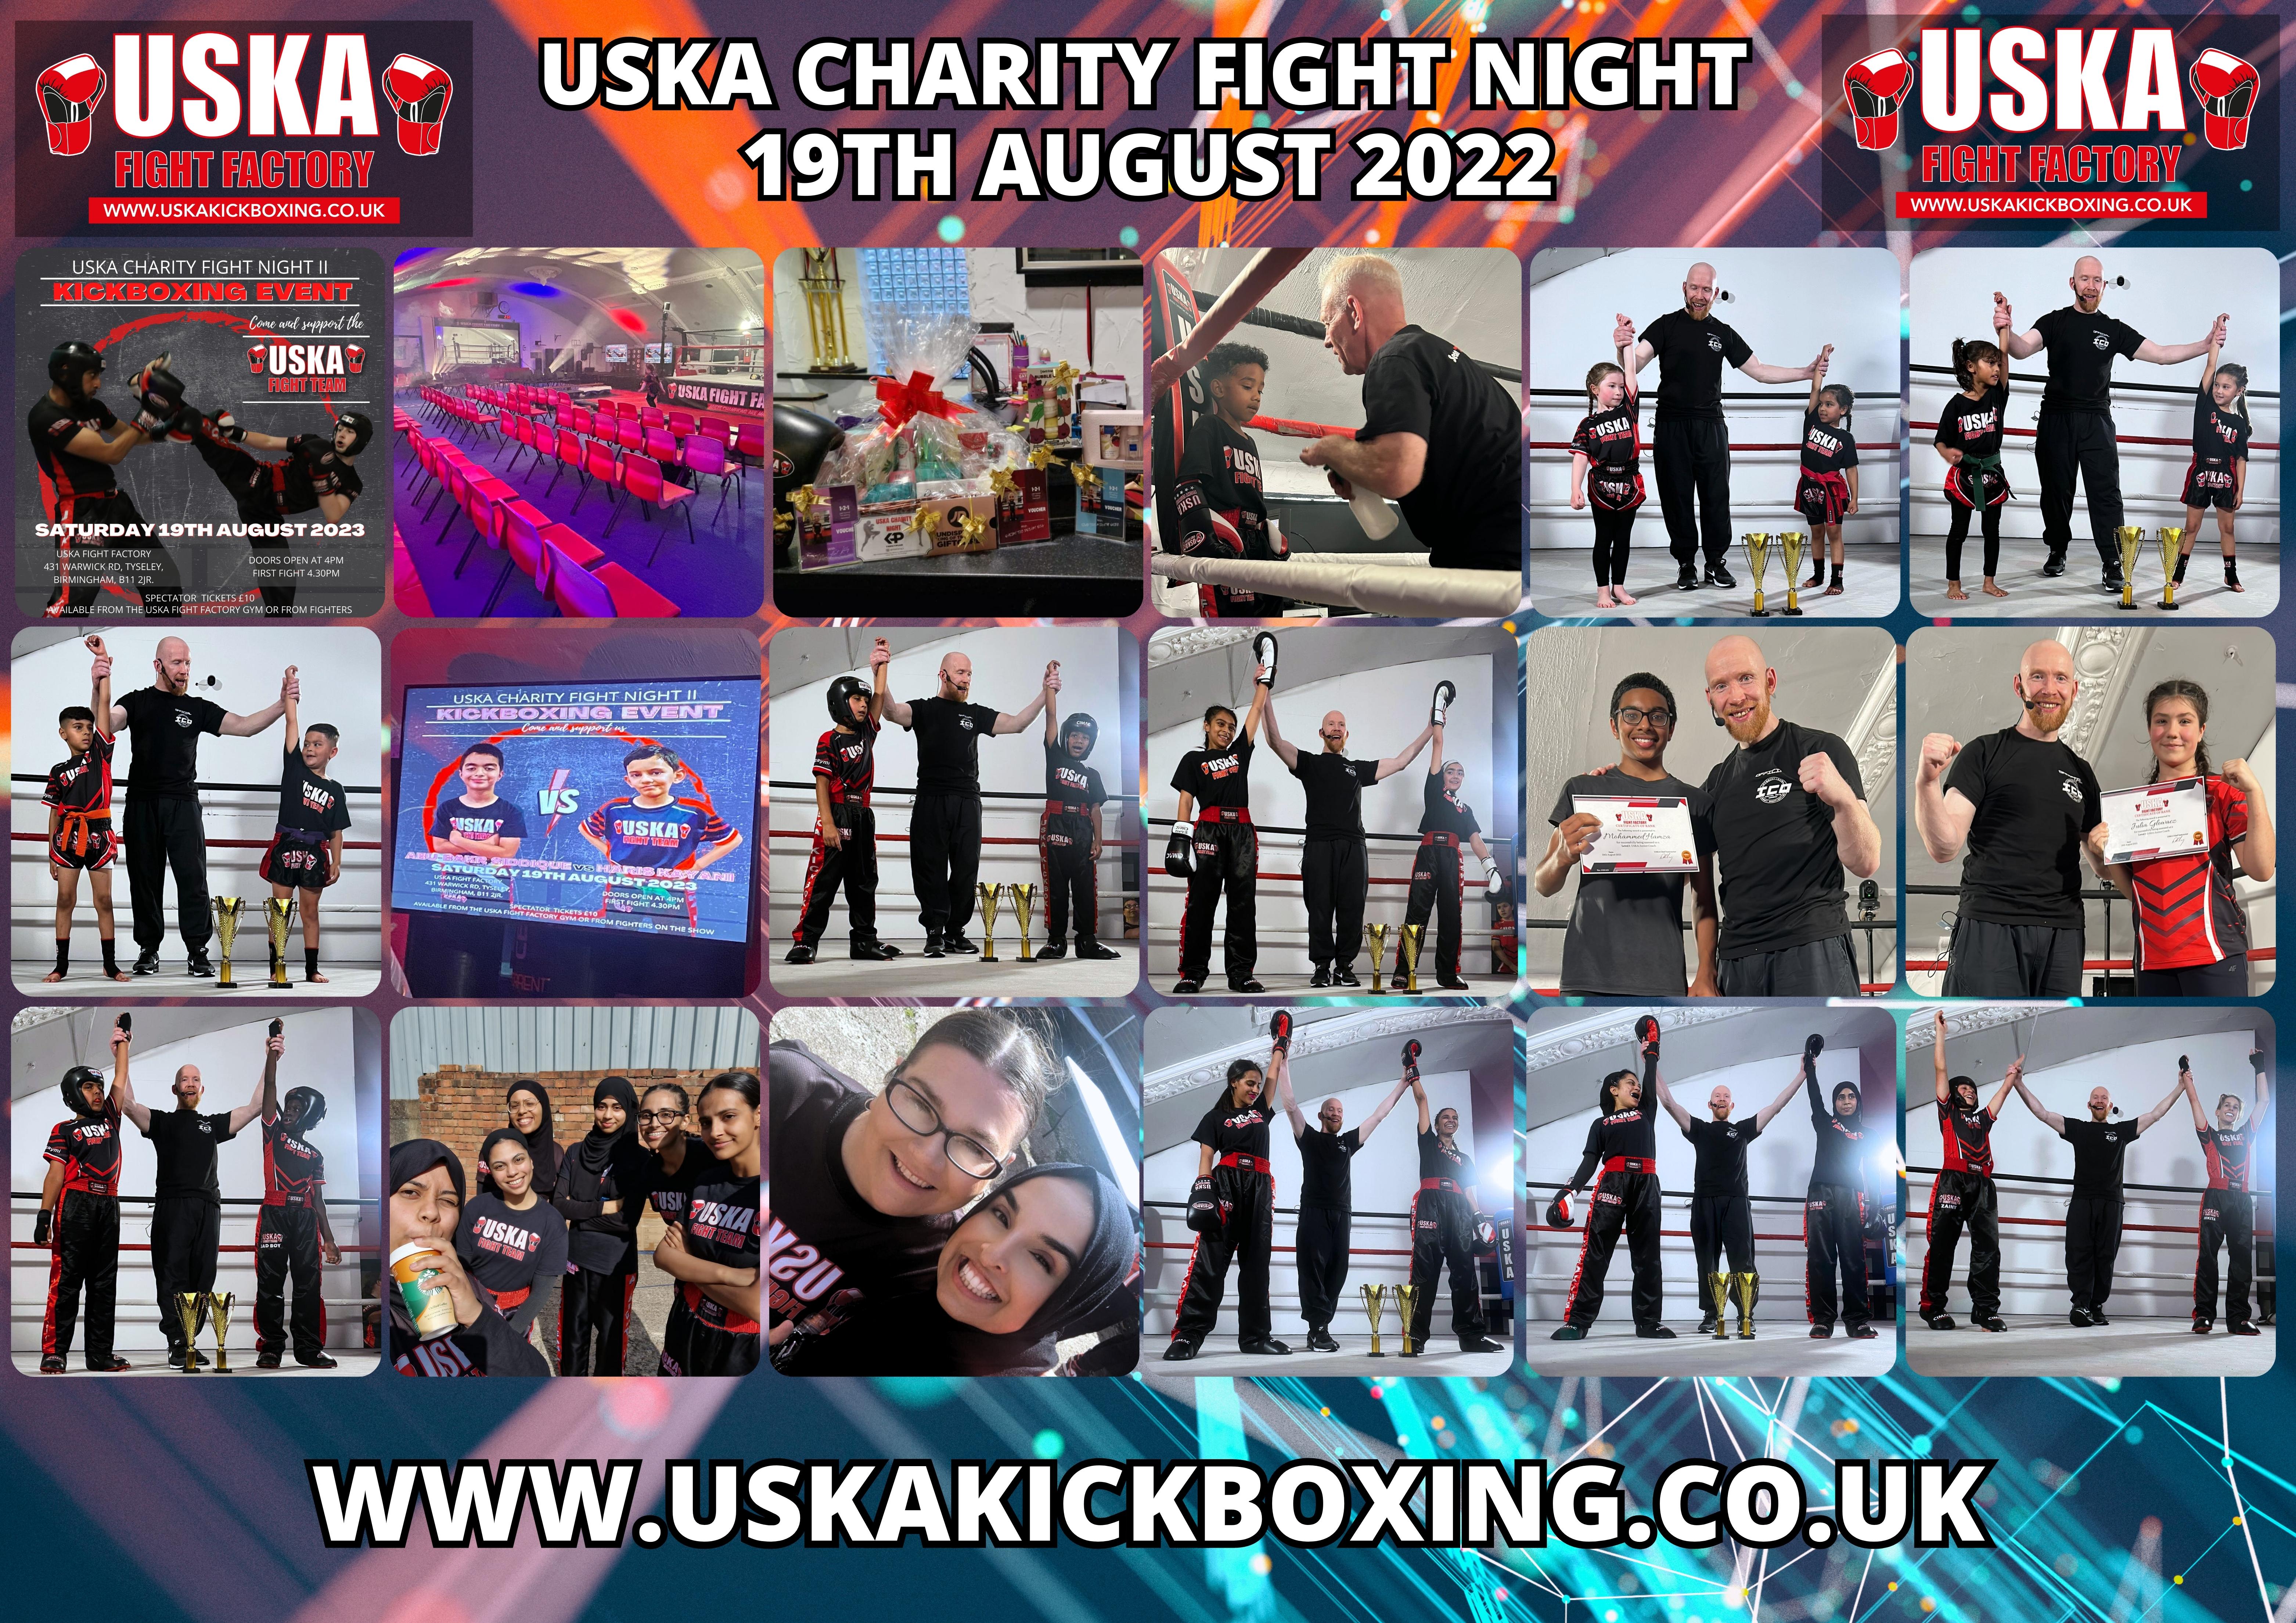 19-08-23 - Success! We did it again with our USKA CHARITY FIGHT NIGHT II Event!